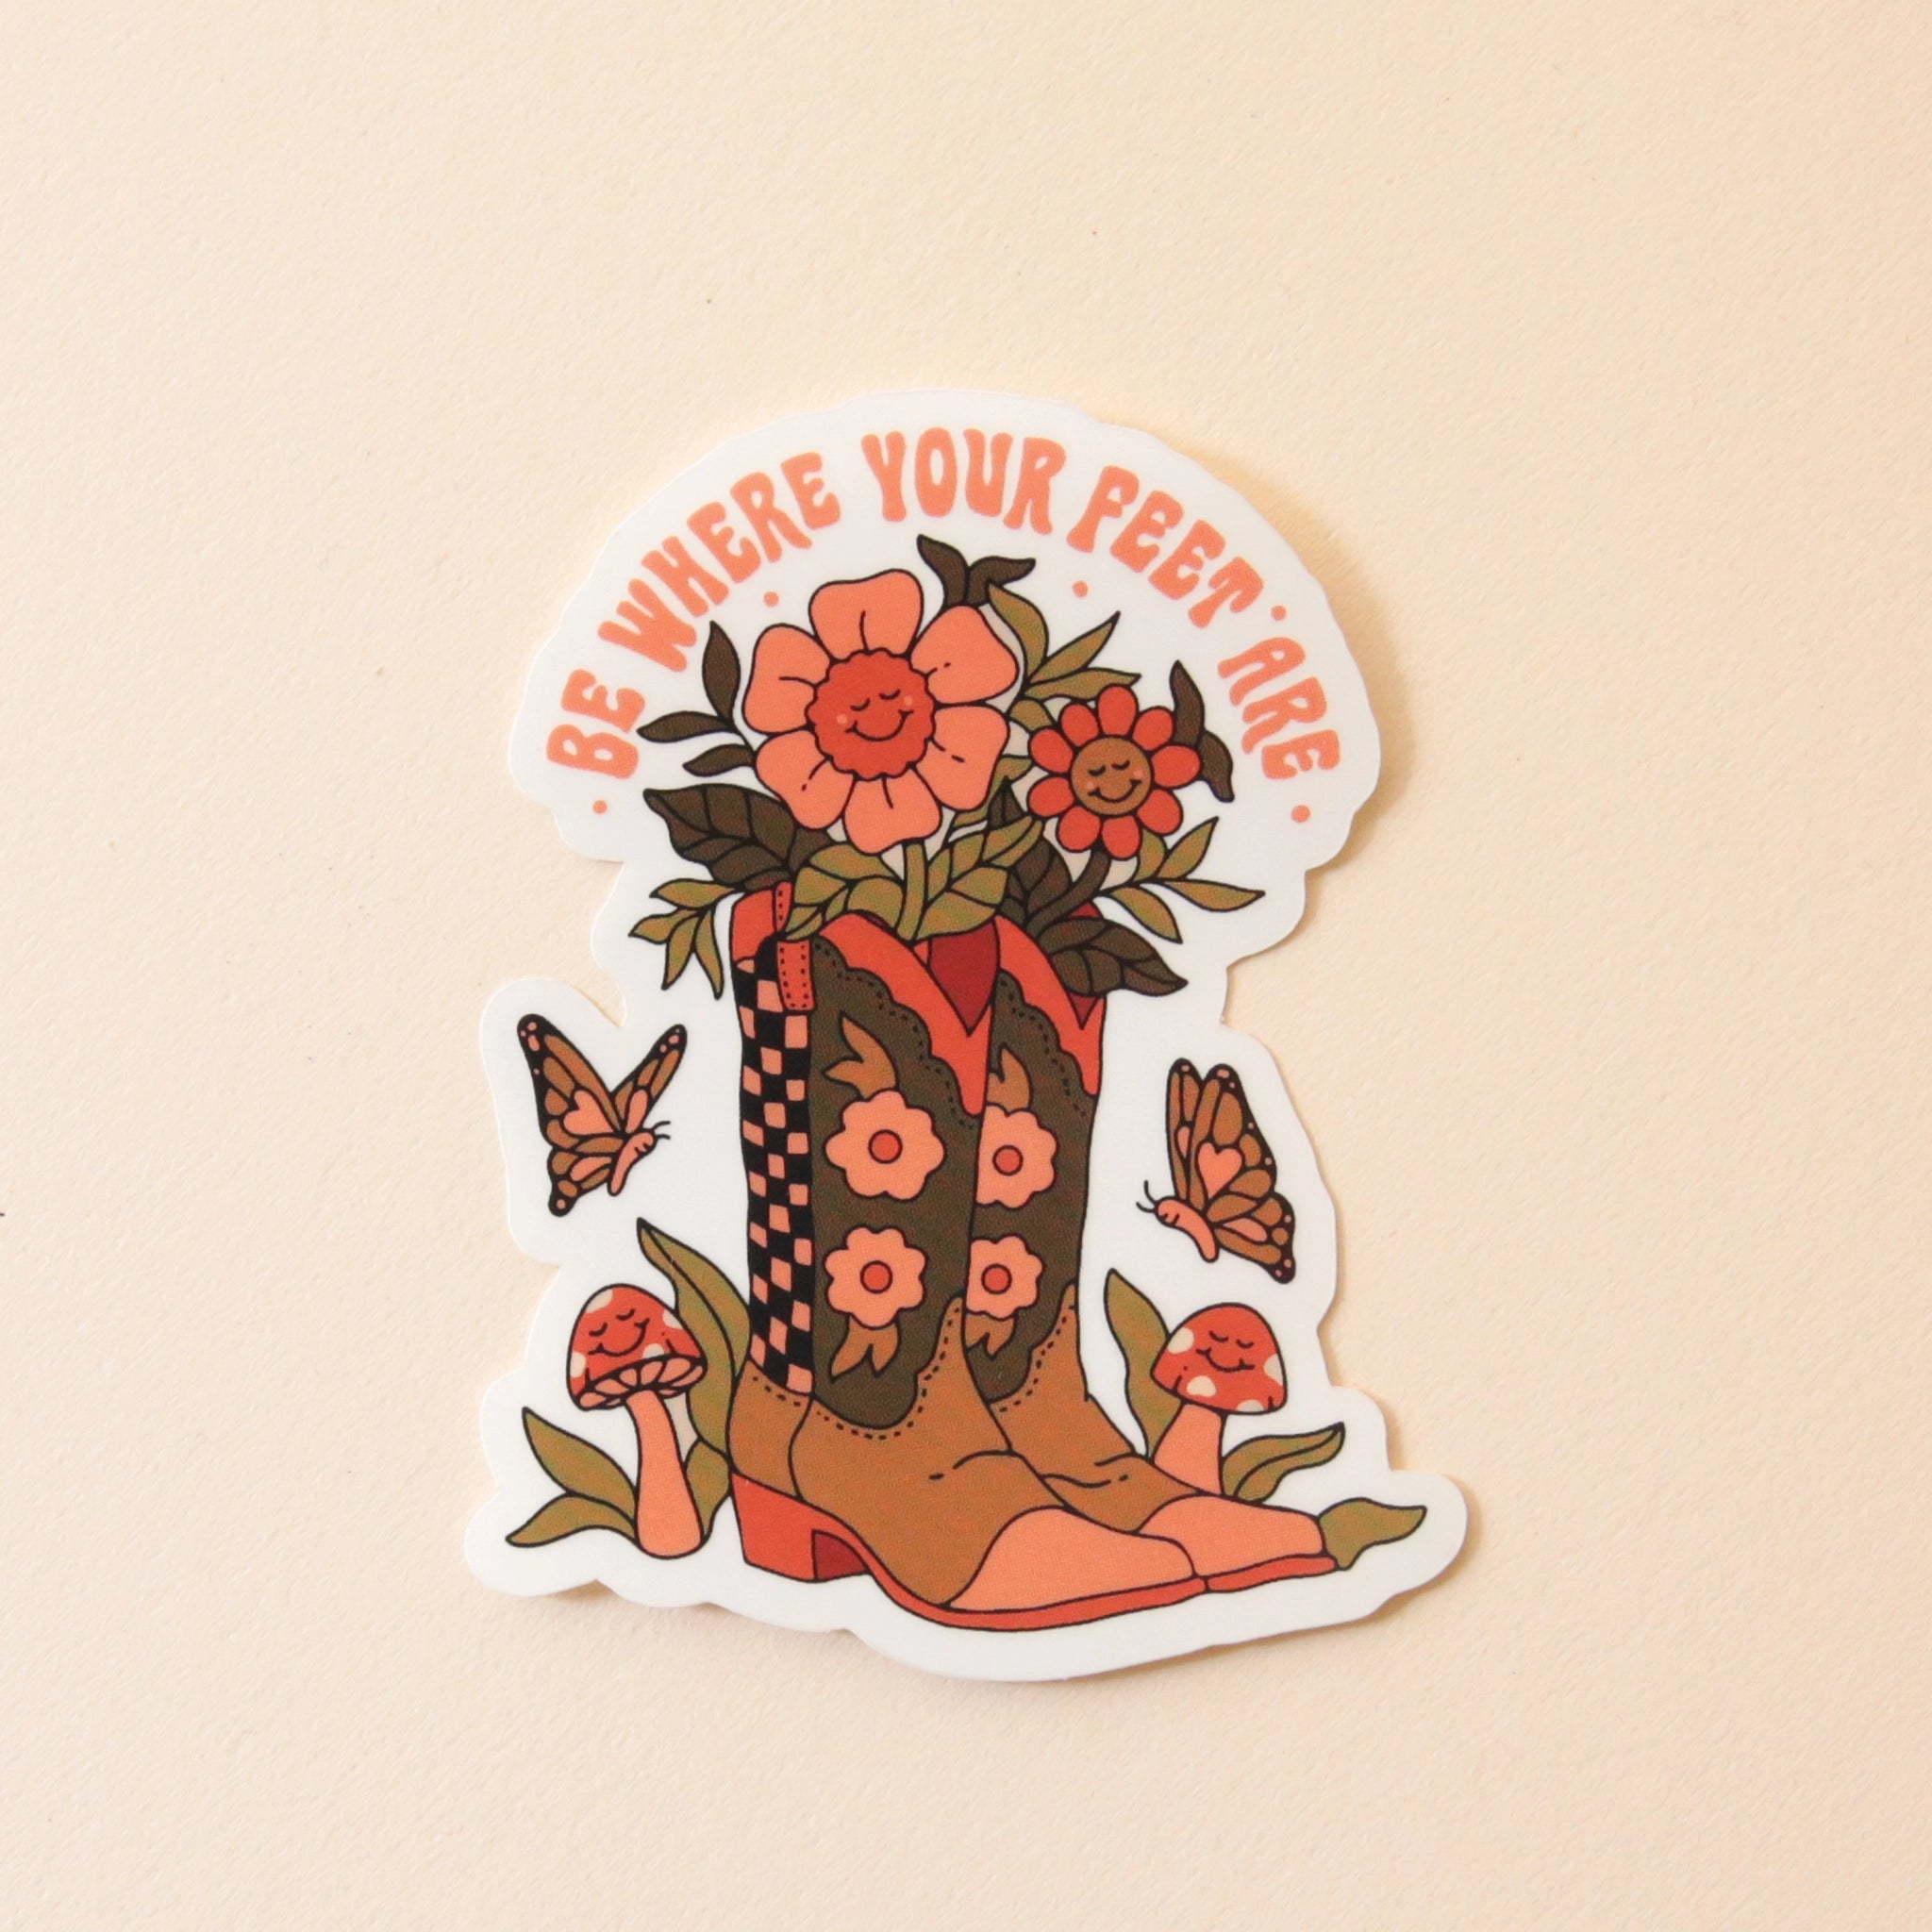 On a white background is a sticker shaped in a cowgirl boot with flowers and surrounded by mushrooms and butterflies as well as text arched above that reads, "Be Where Your Feet Are".